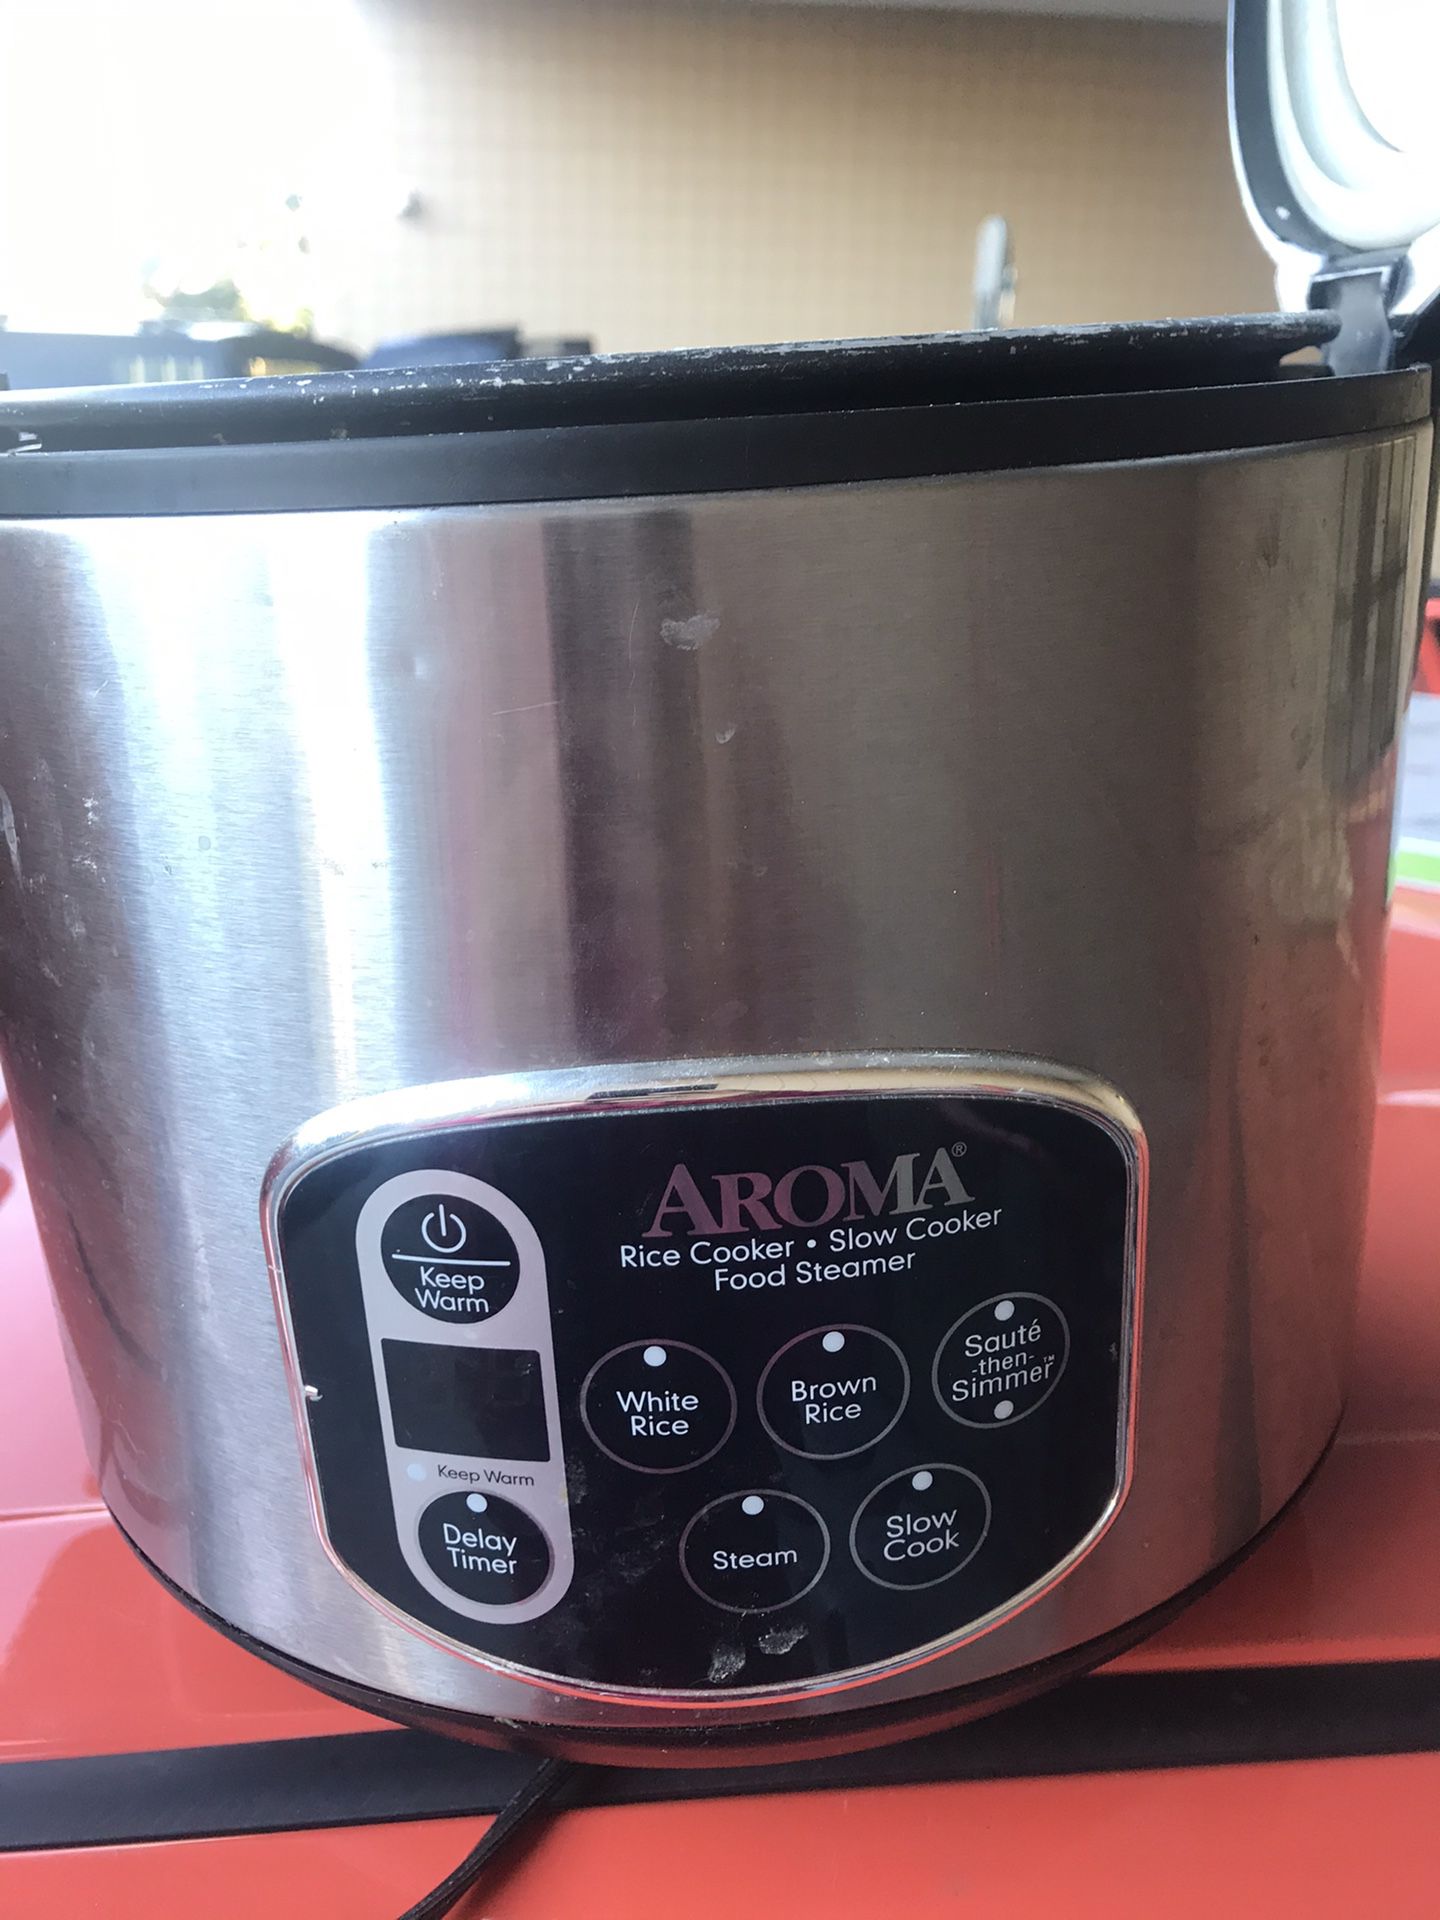 Aroma rice cooker, slow cooker, food steamer